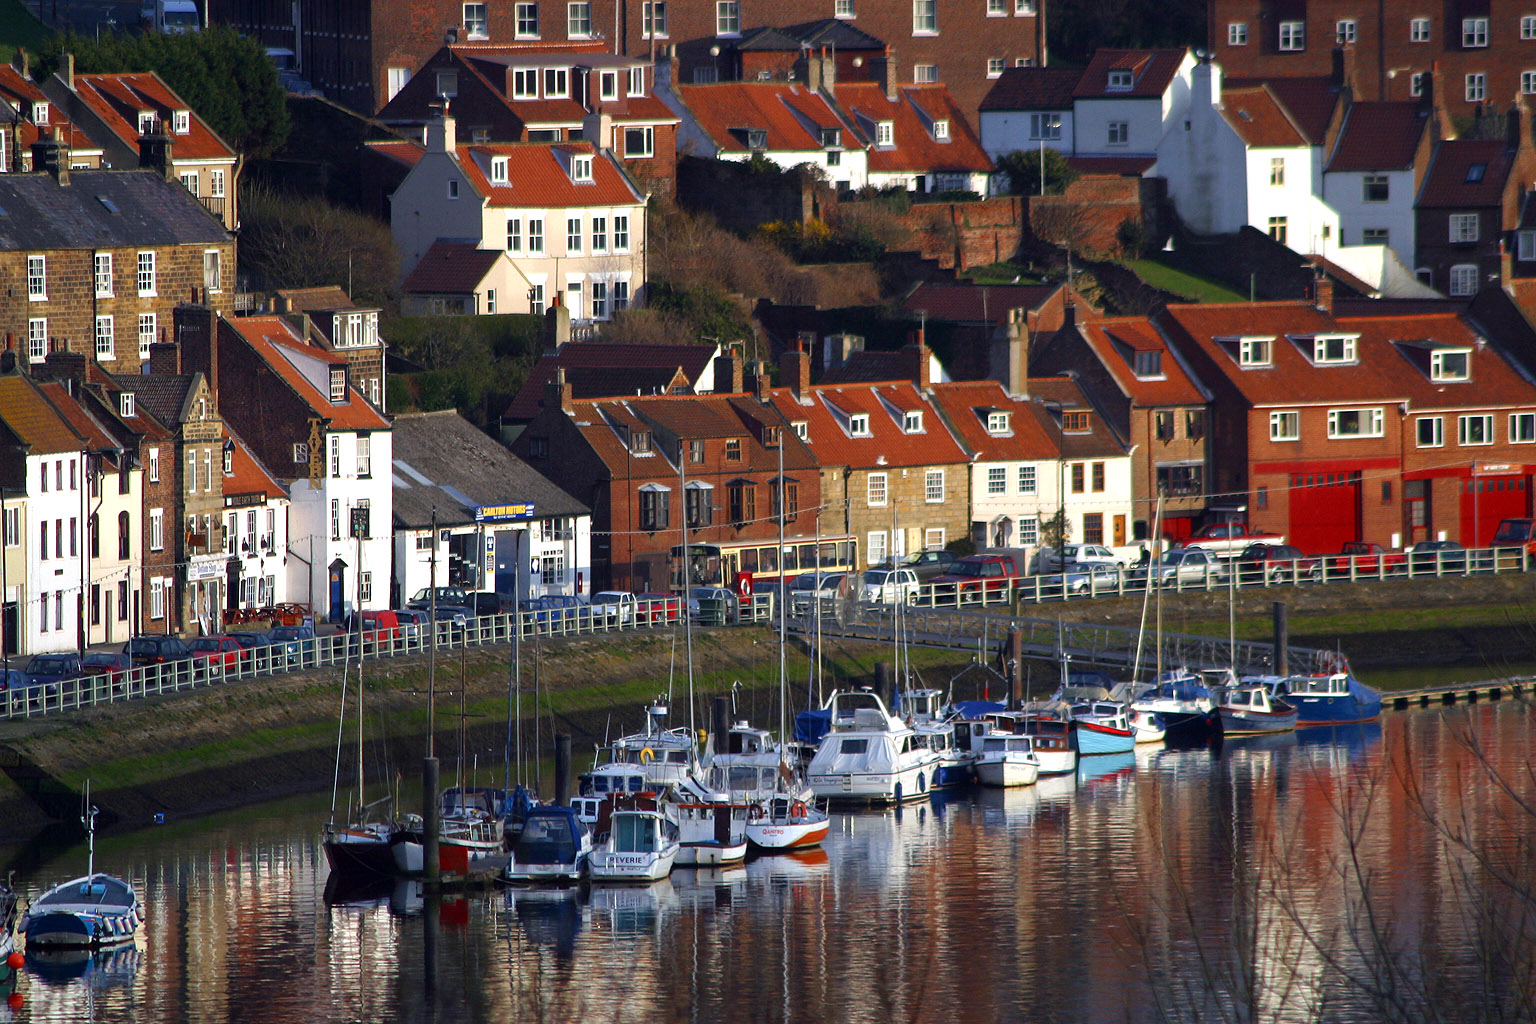 The harbour in Whitby